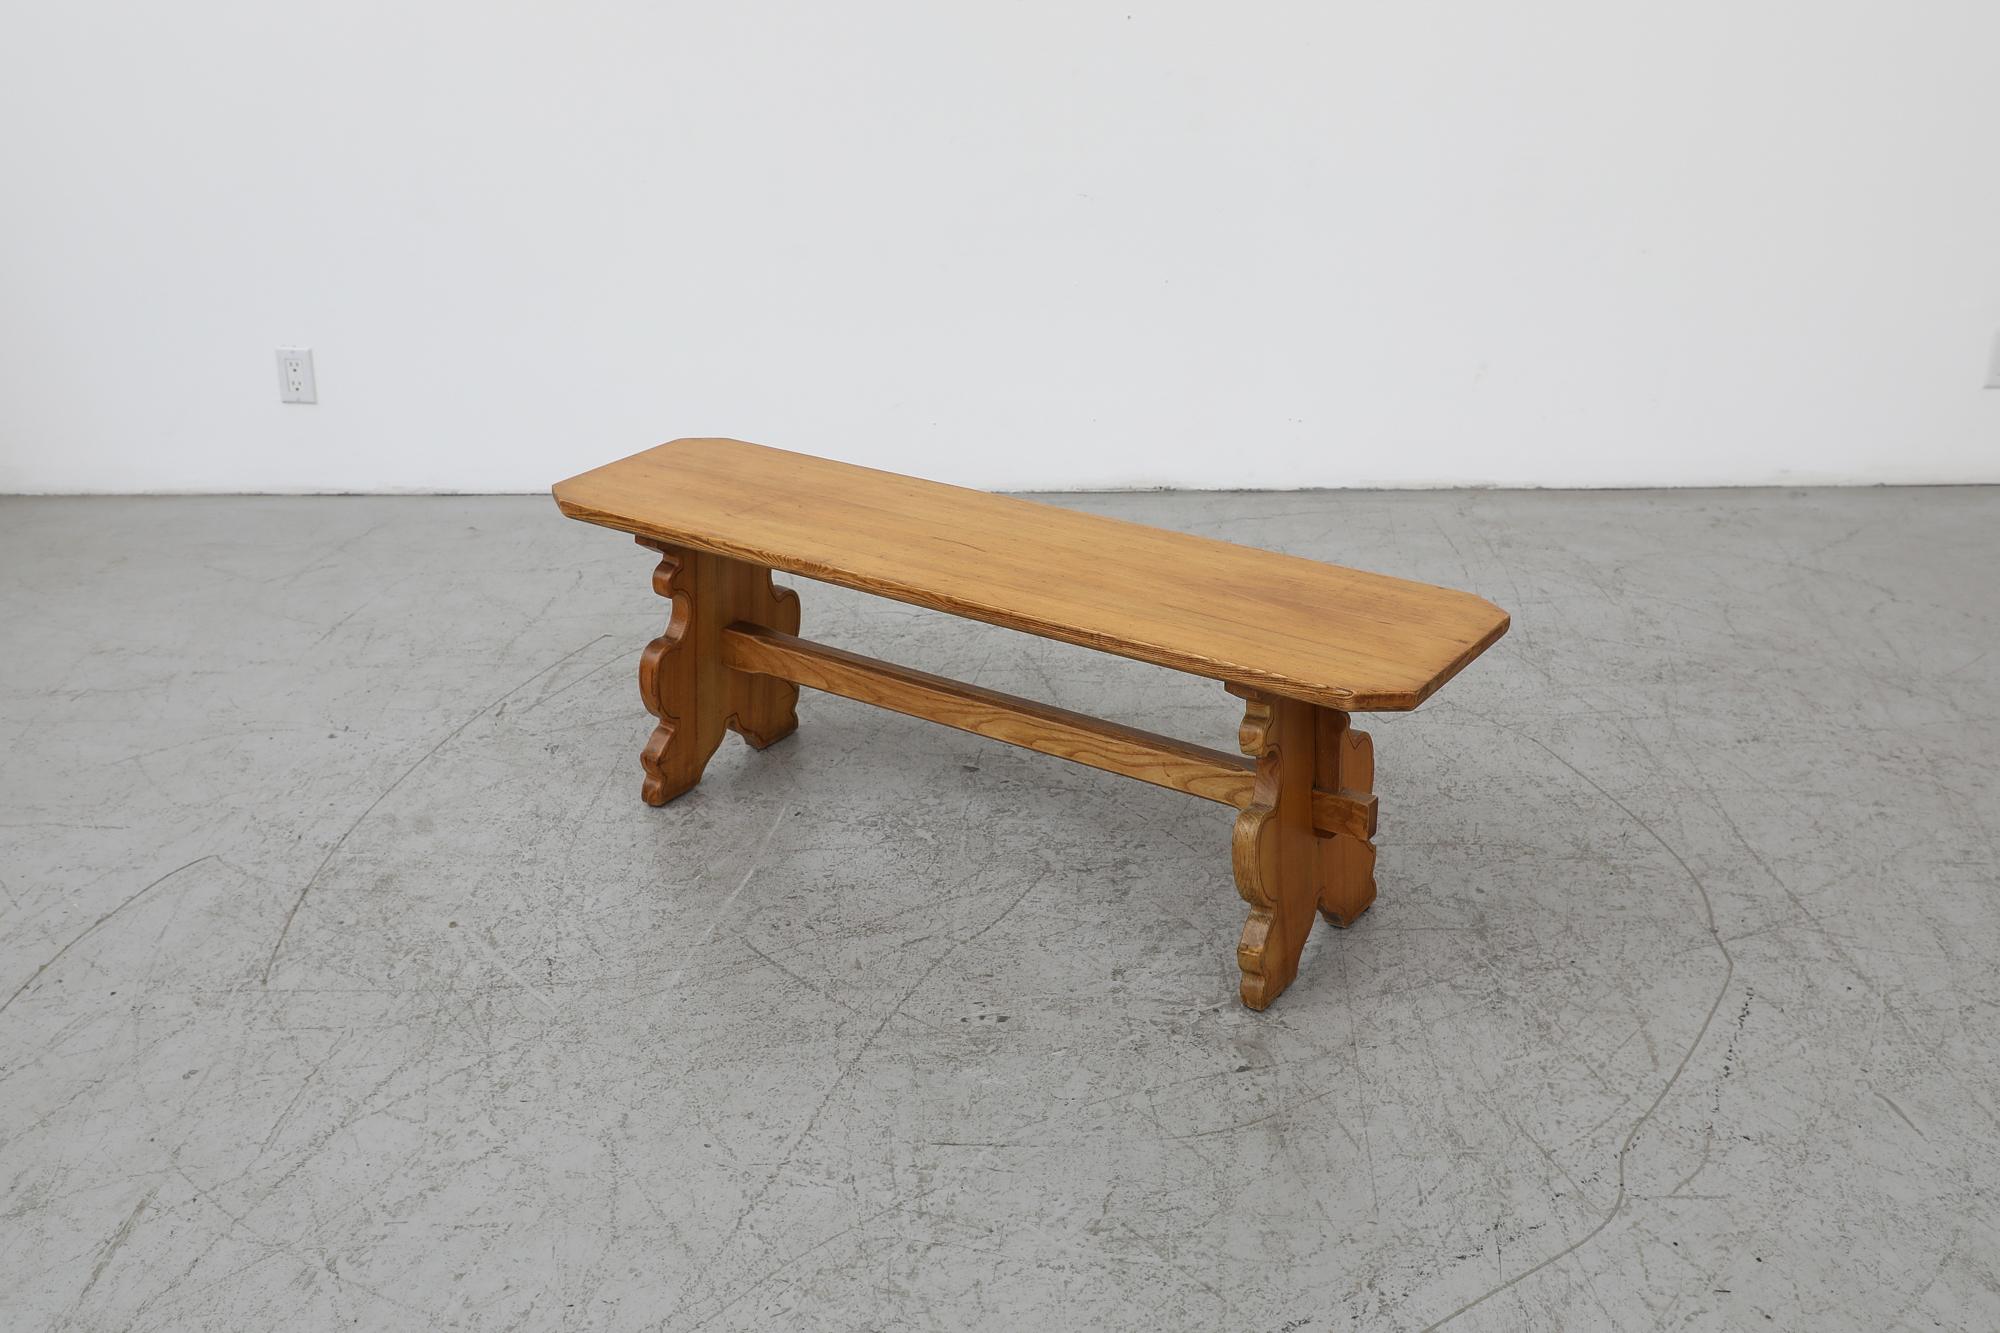 Dutch Mid-Century Tyrolean Style Ornate Bench from Austria